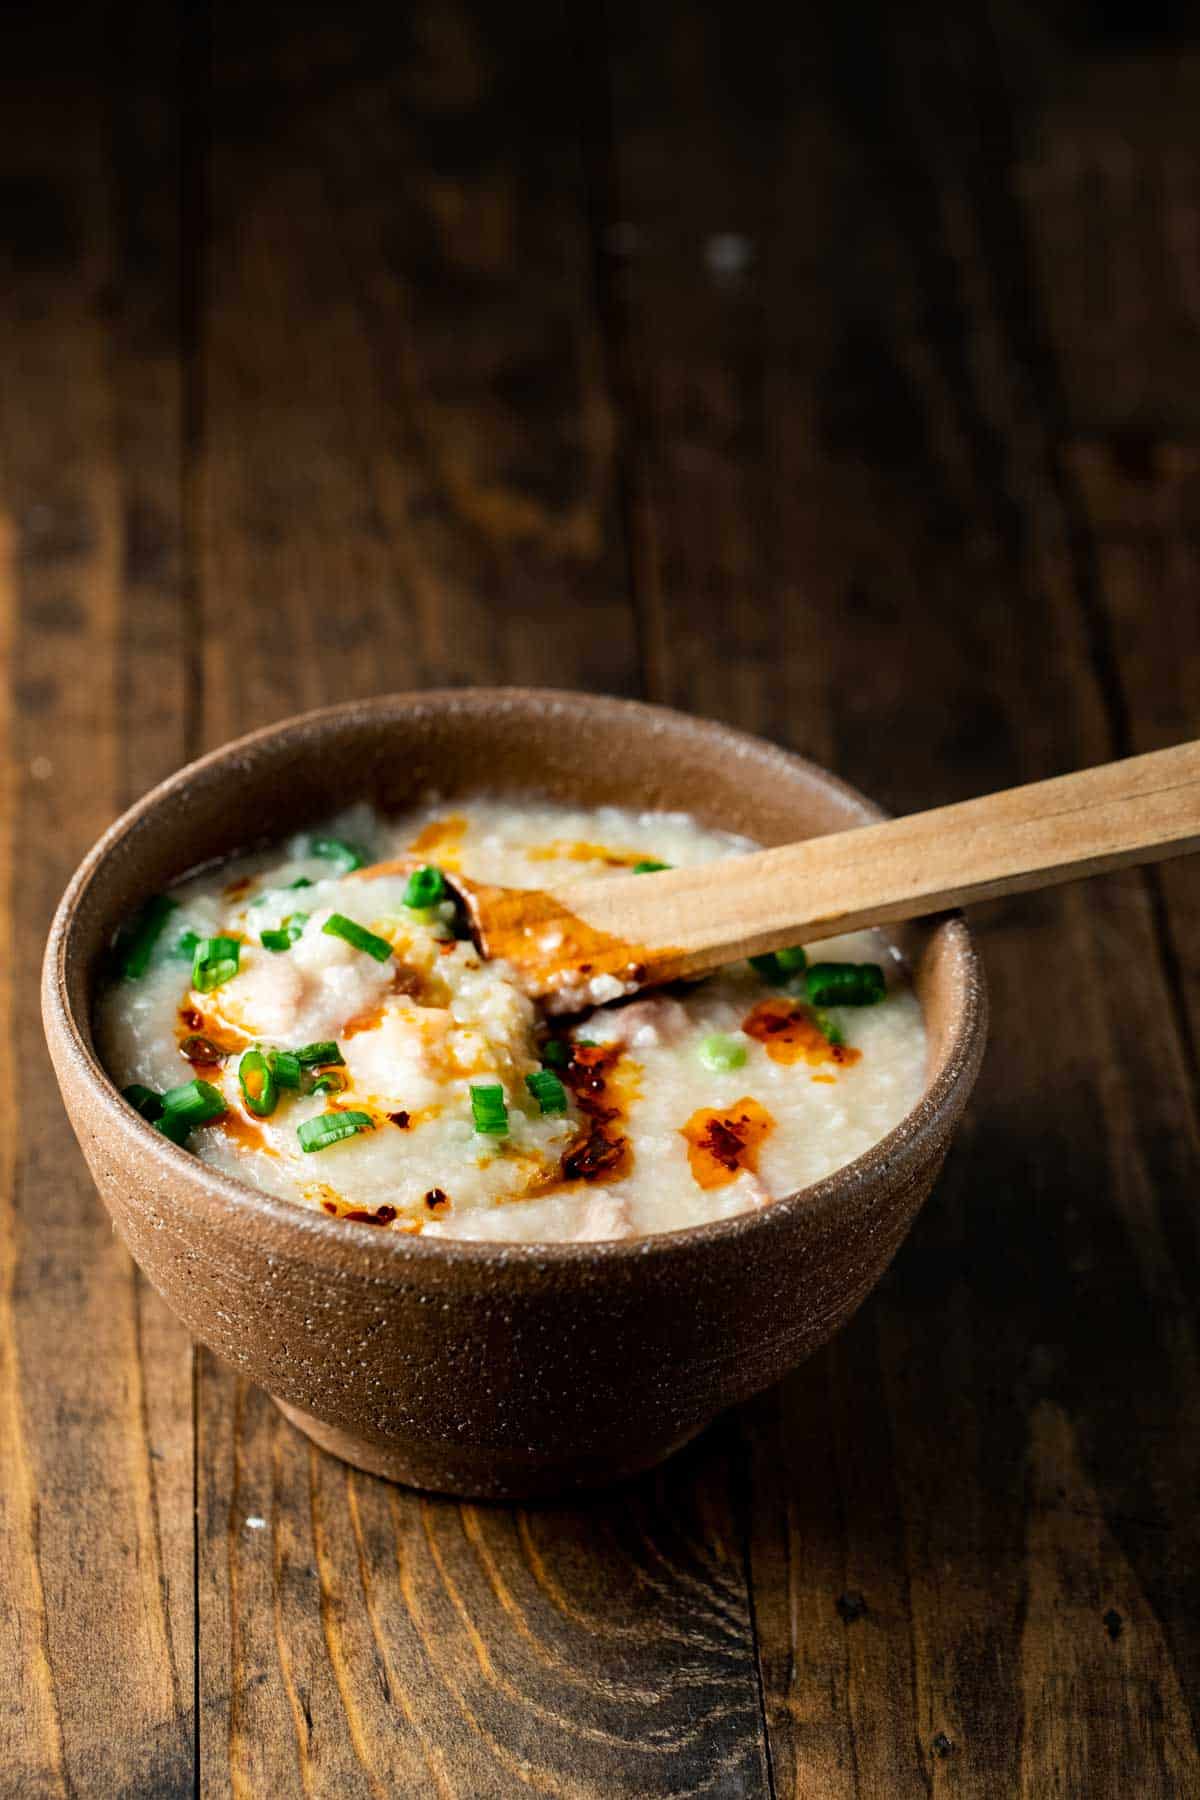 a spoonful of congee over a bowl of it garnished with green onions and chili oil